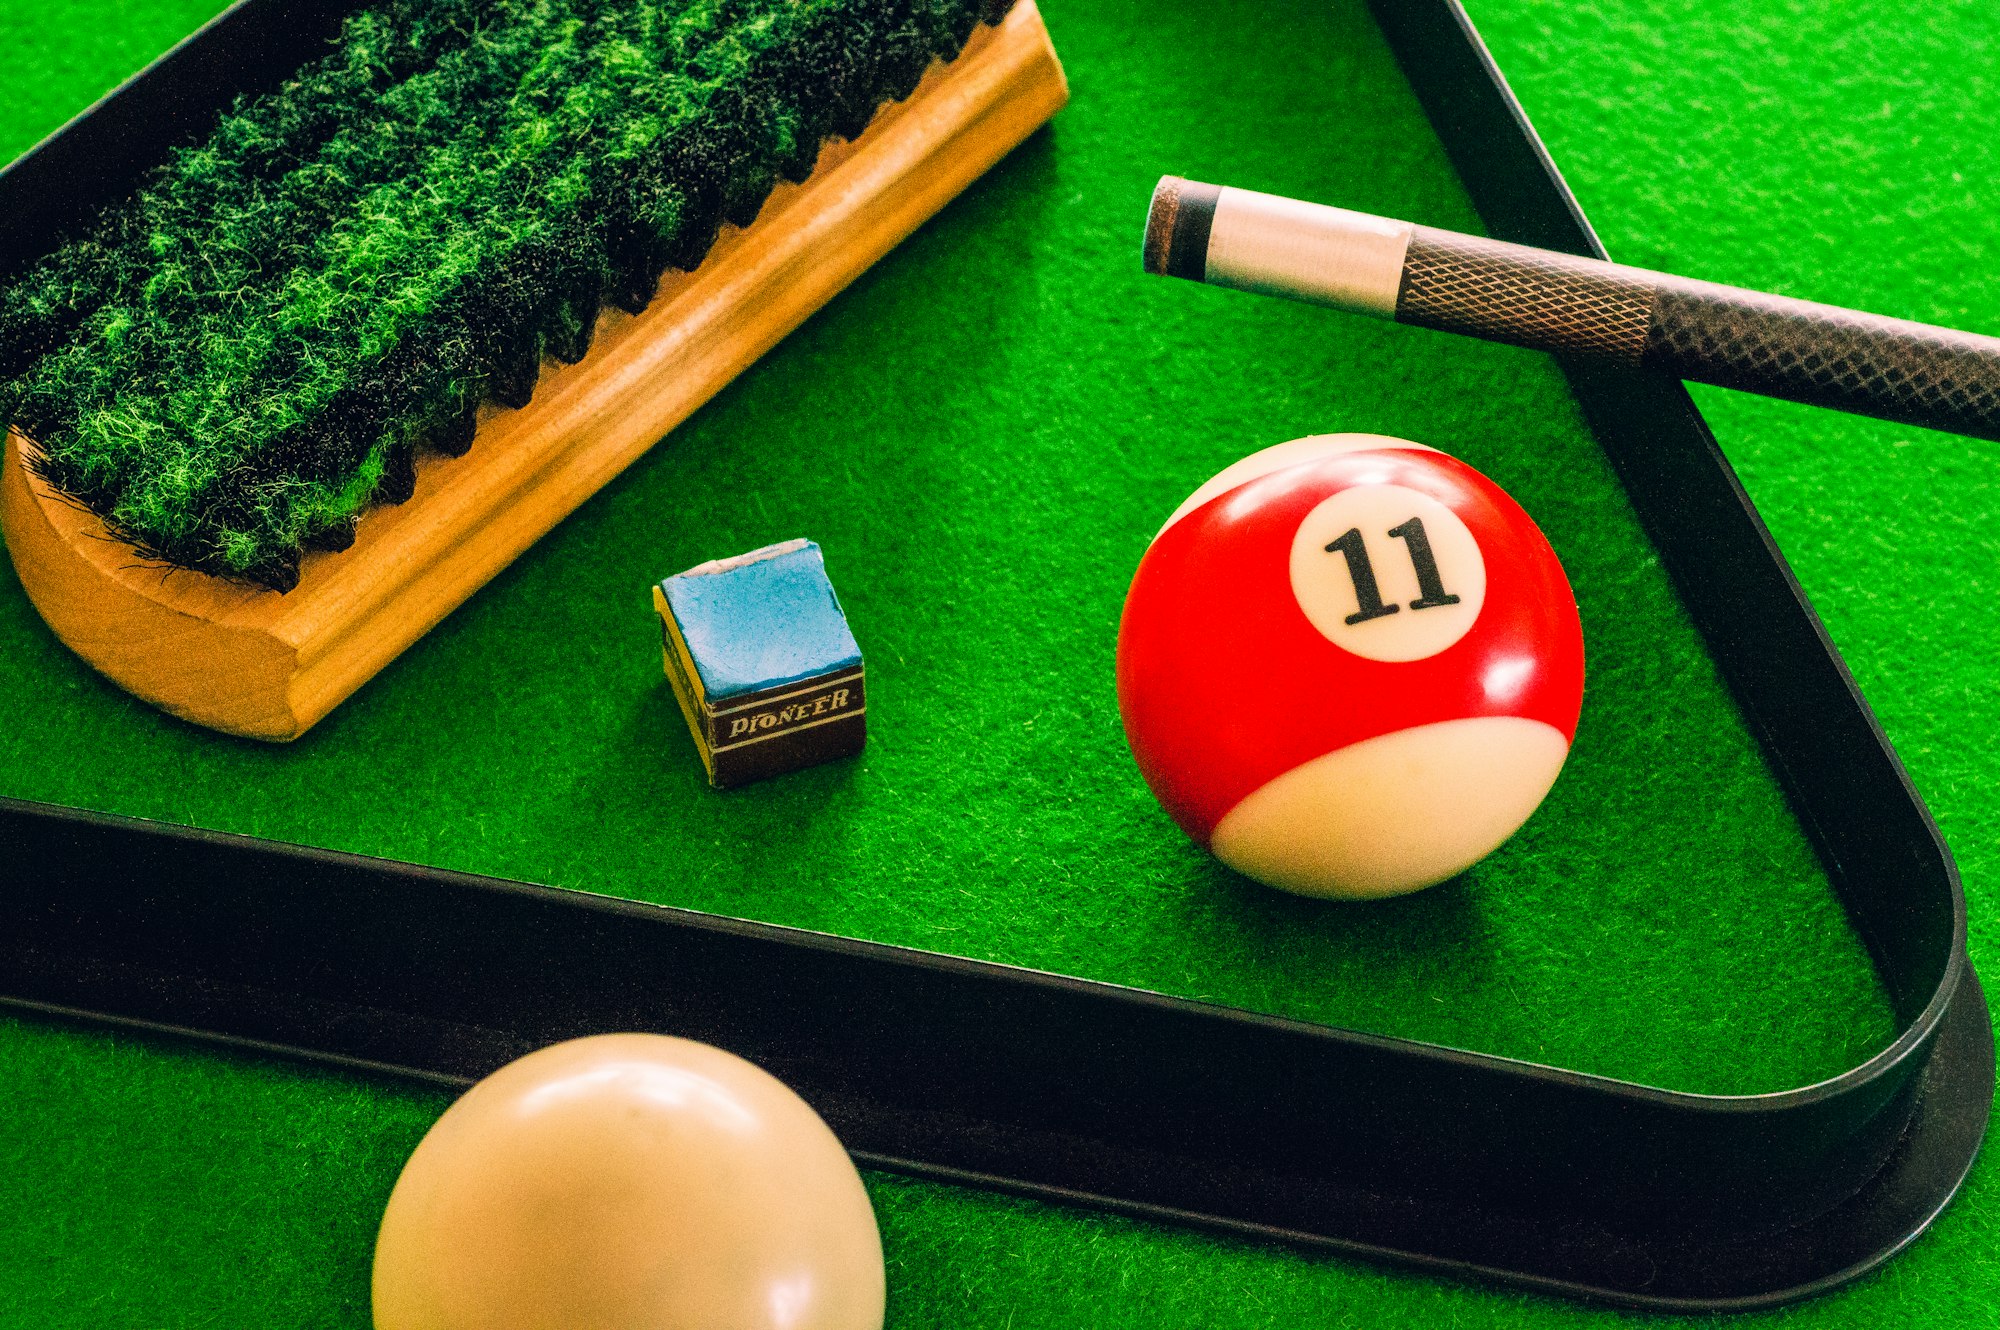 An assortment of billiards items in a single image.